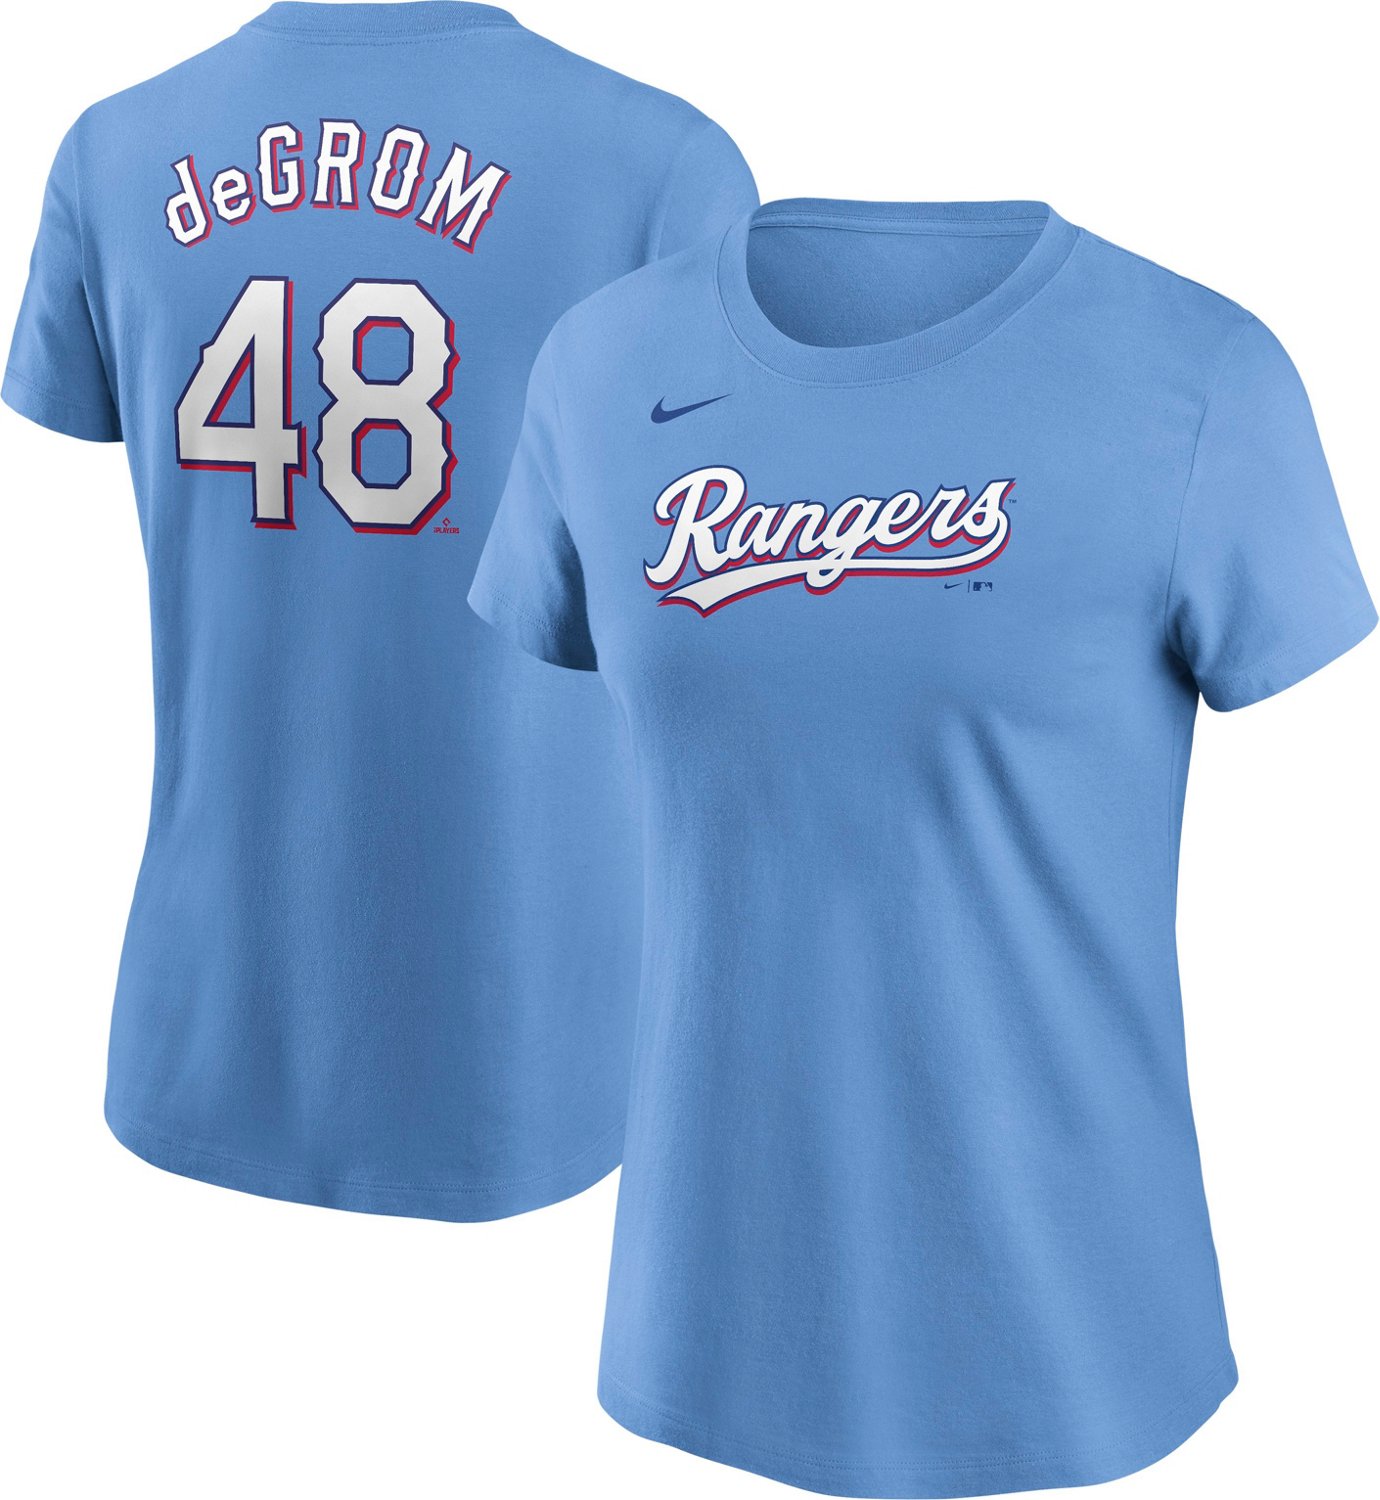 Nike Women's Texas Rangers deGrom Away Name and Number Graphic T-shirt